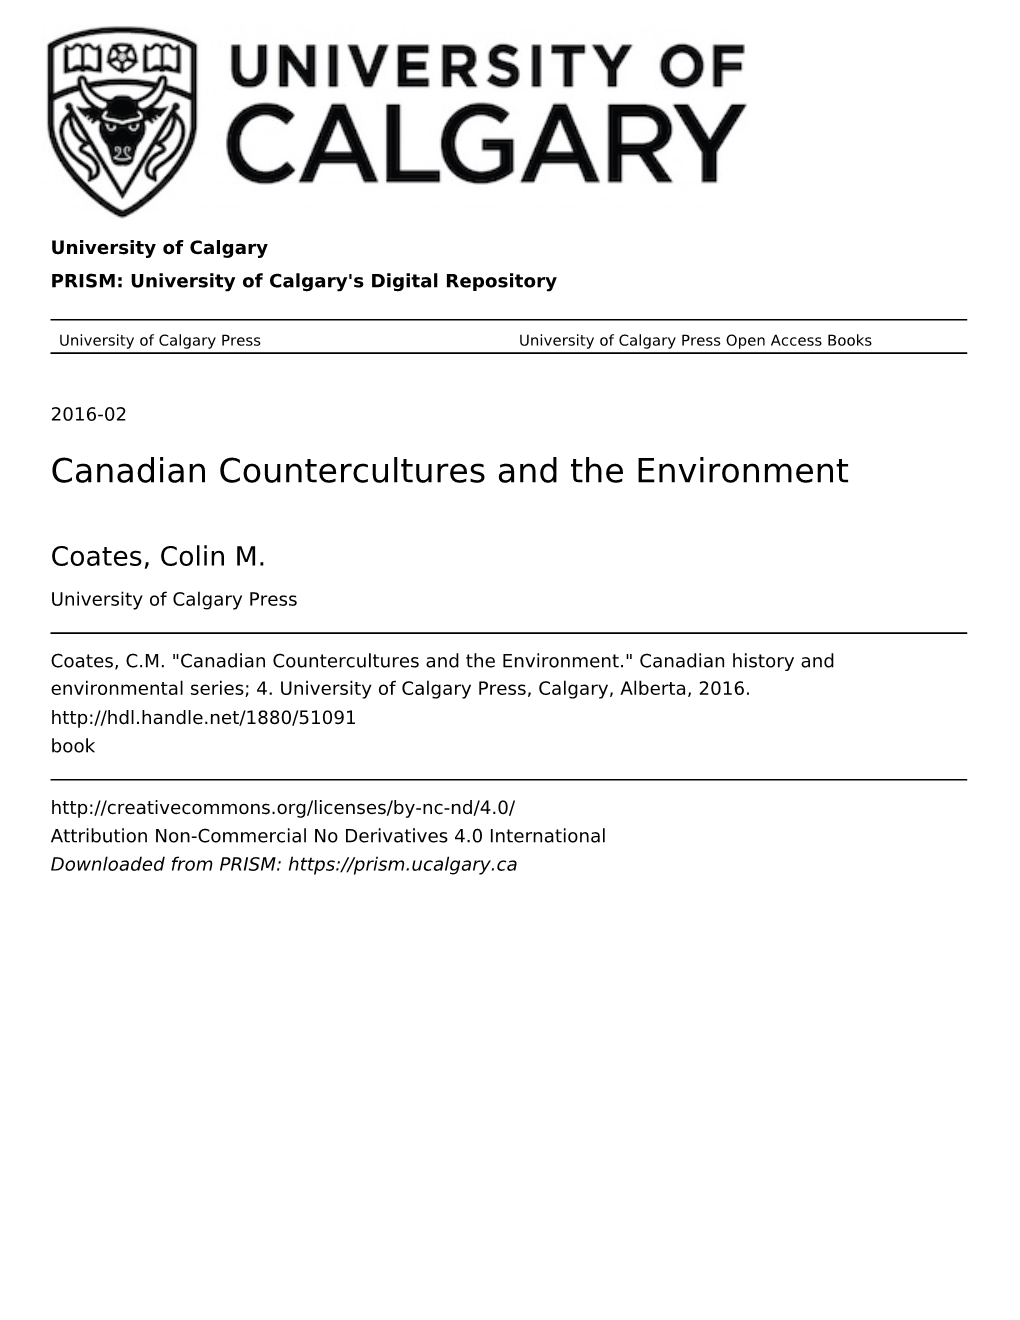 Canadian Countercultures and the Environment